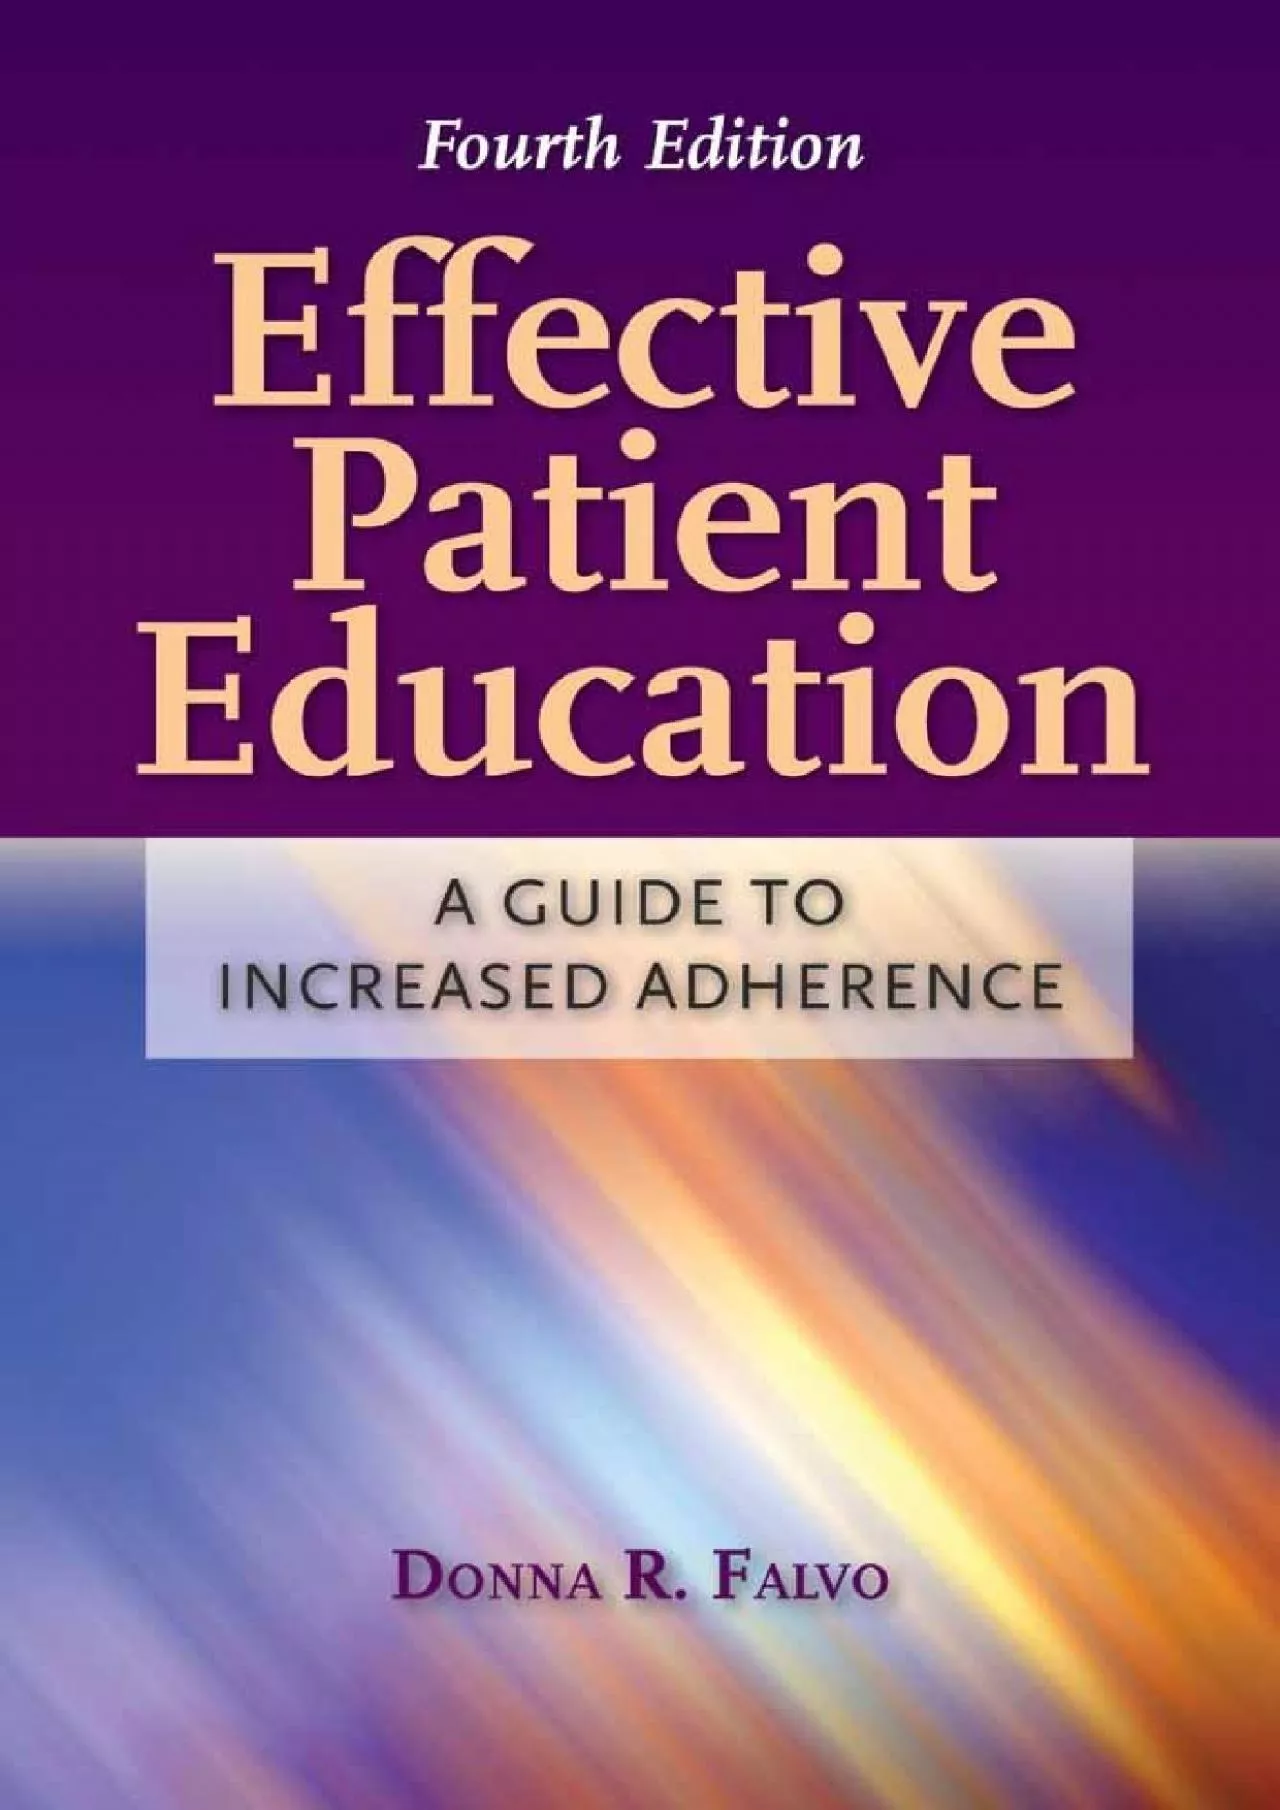 (BOOK)-Effective Patient Education: A Guide to Increased Adherence: A Guide to Increased